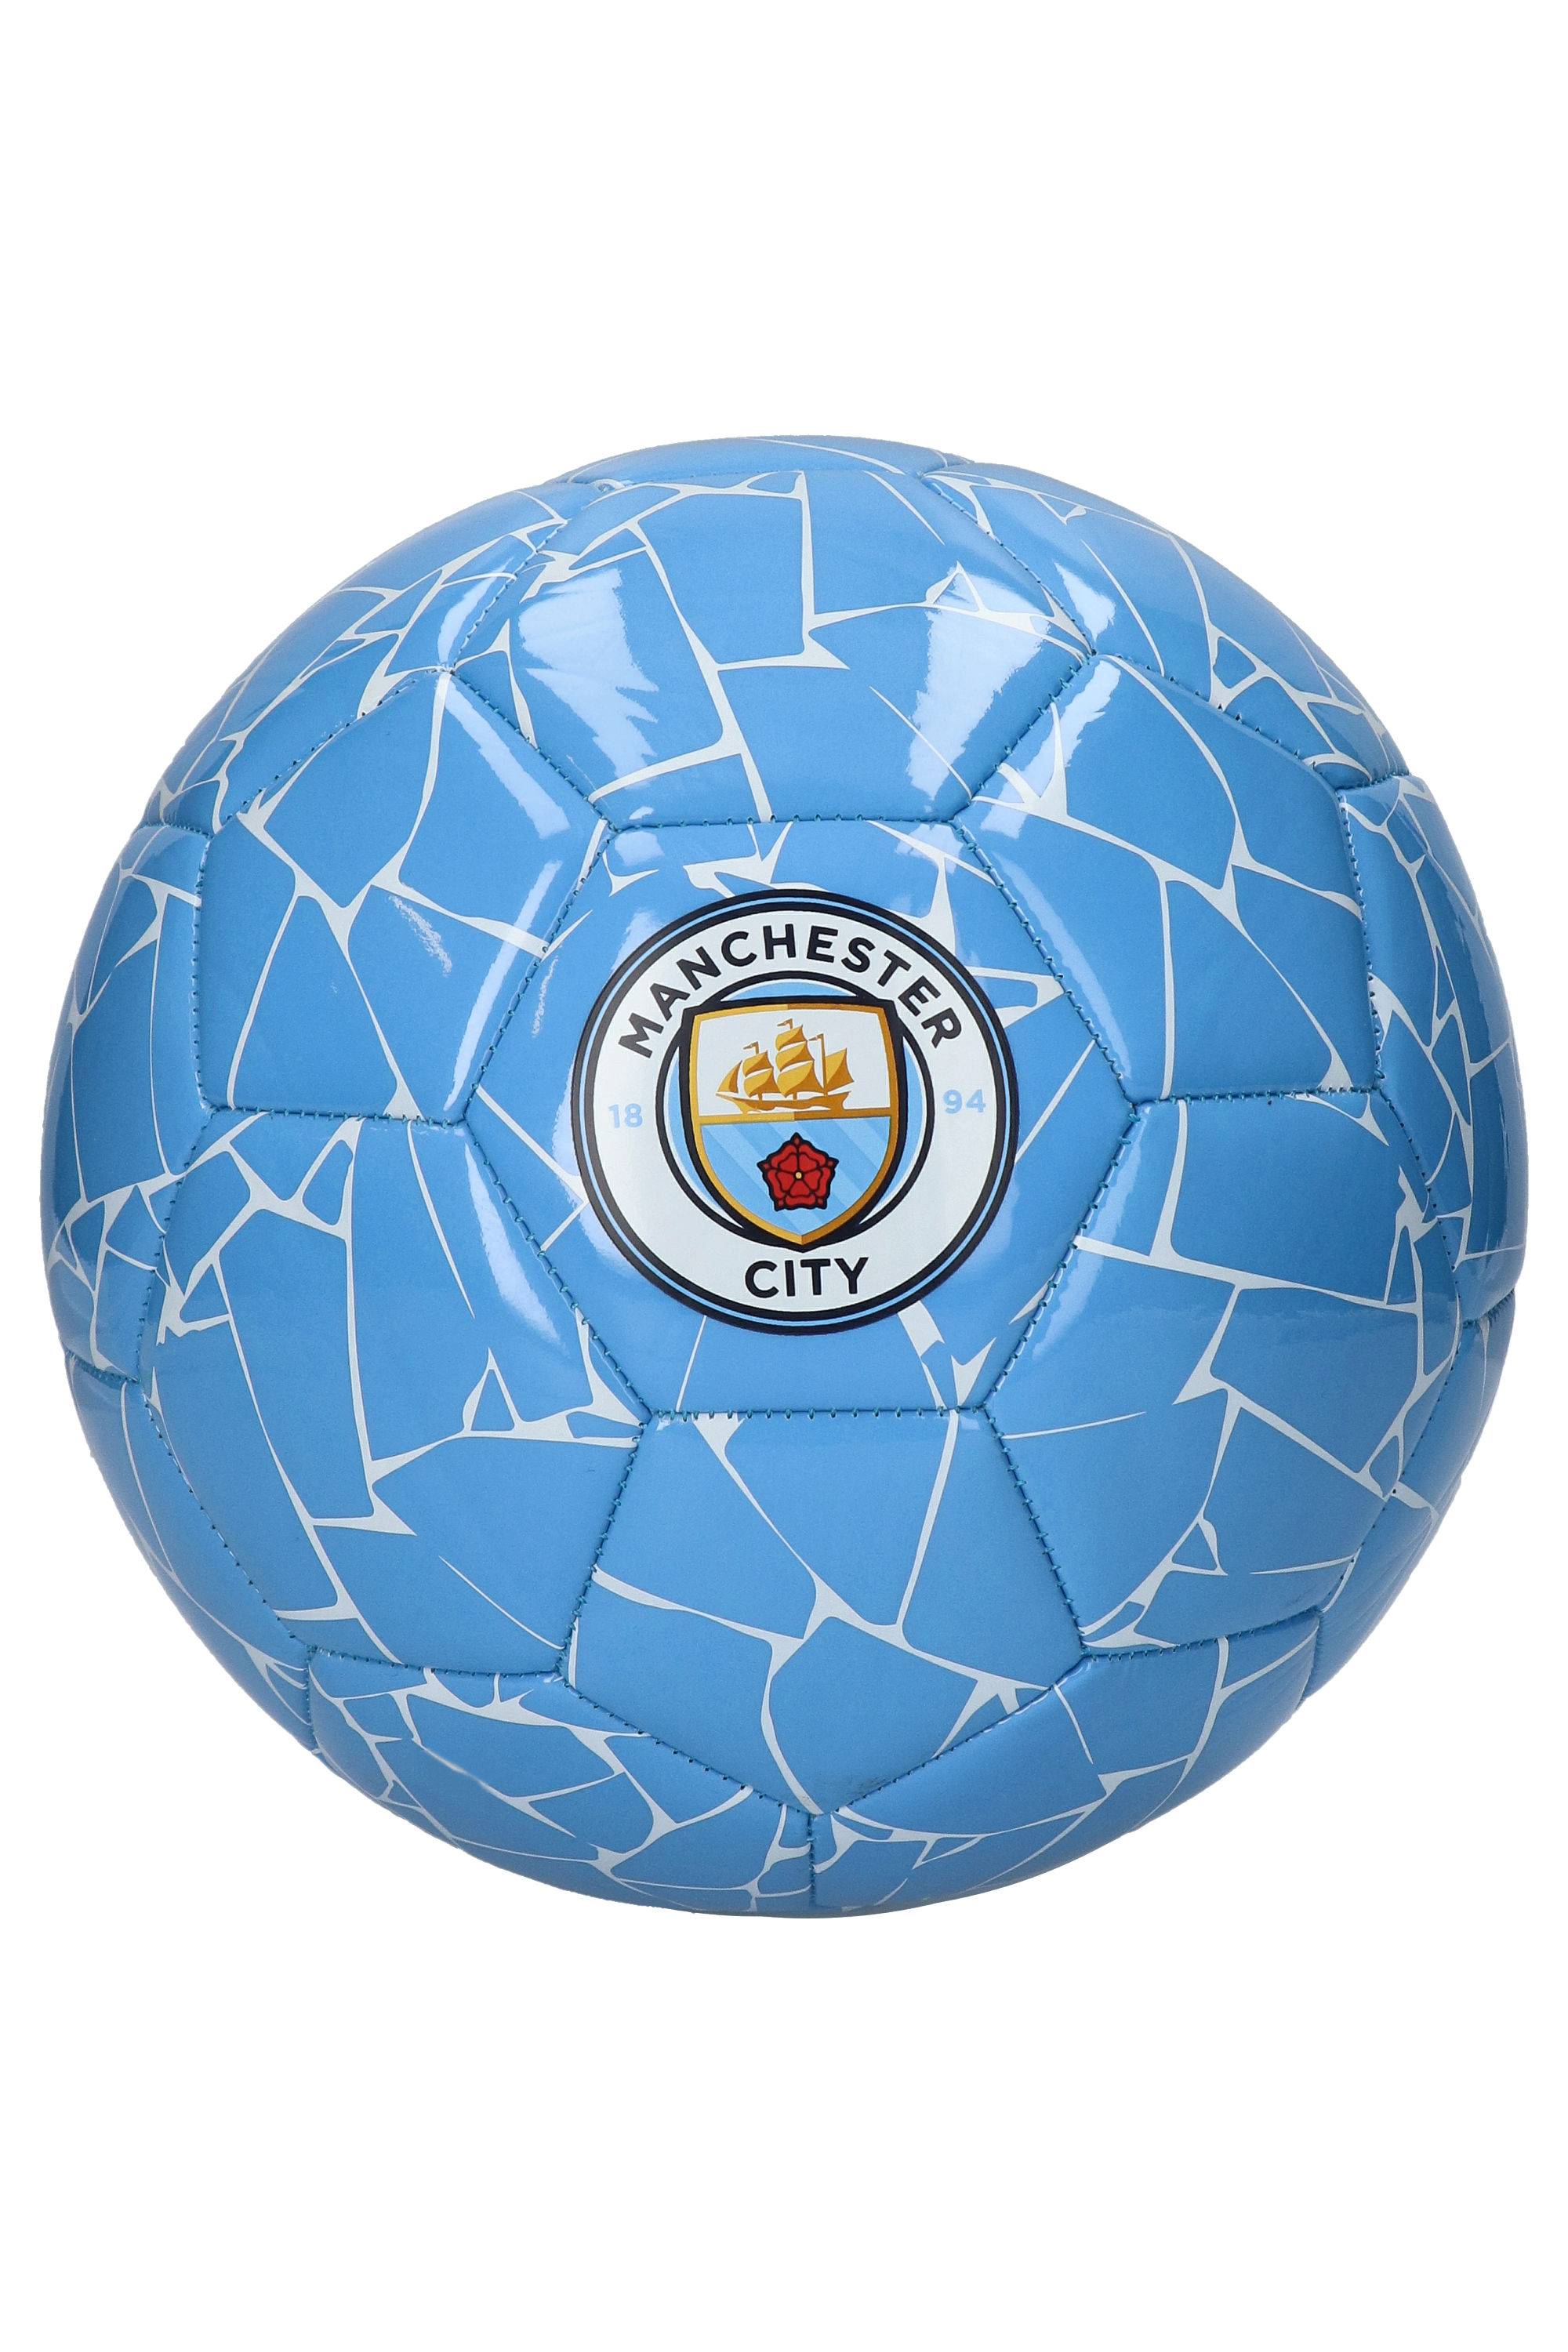 Official Licensed Soccer Size 5 Ball & Scarf Combo 08-9 Manchester City F.C 